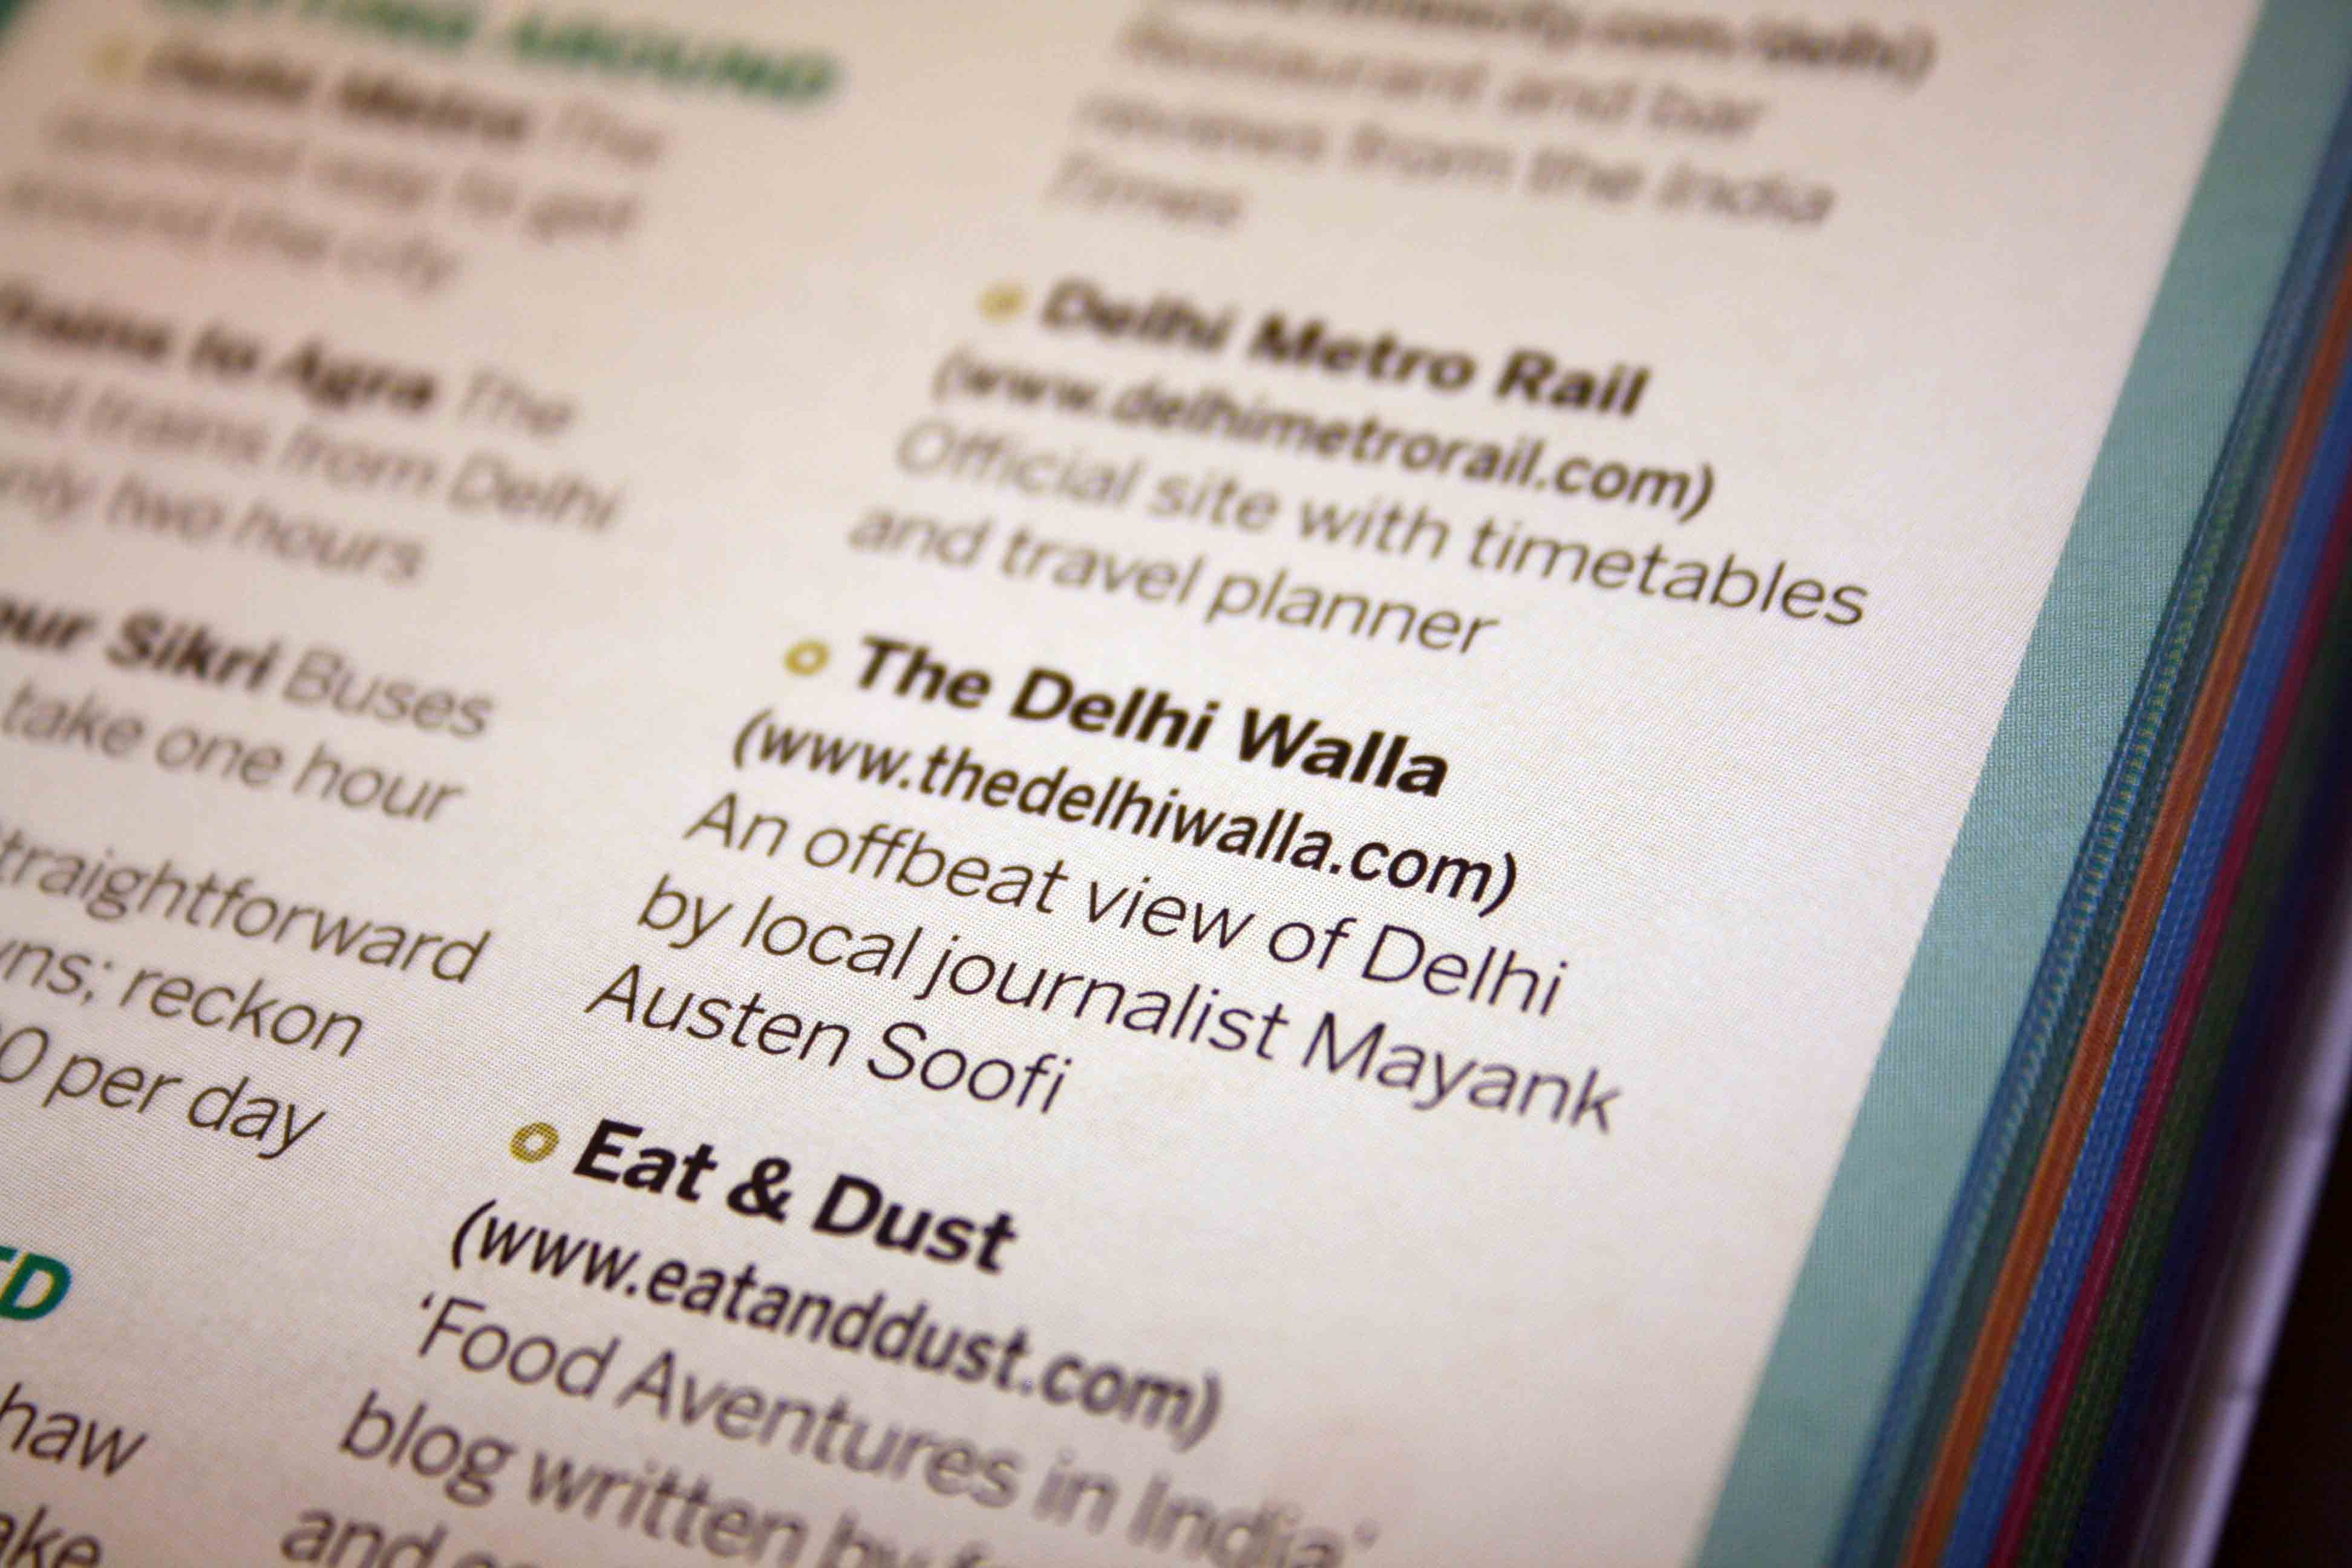 City Notice – Lonely Planet Recommends The Delhi Walla